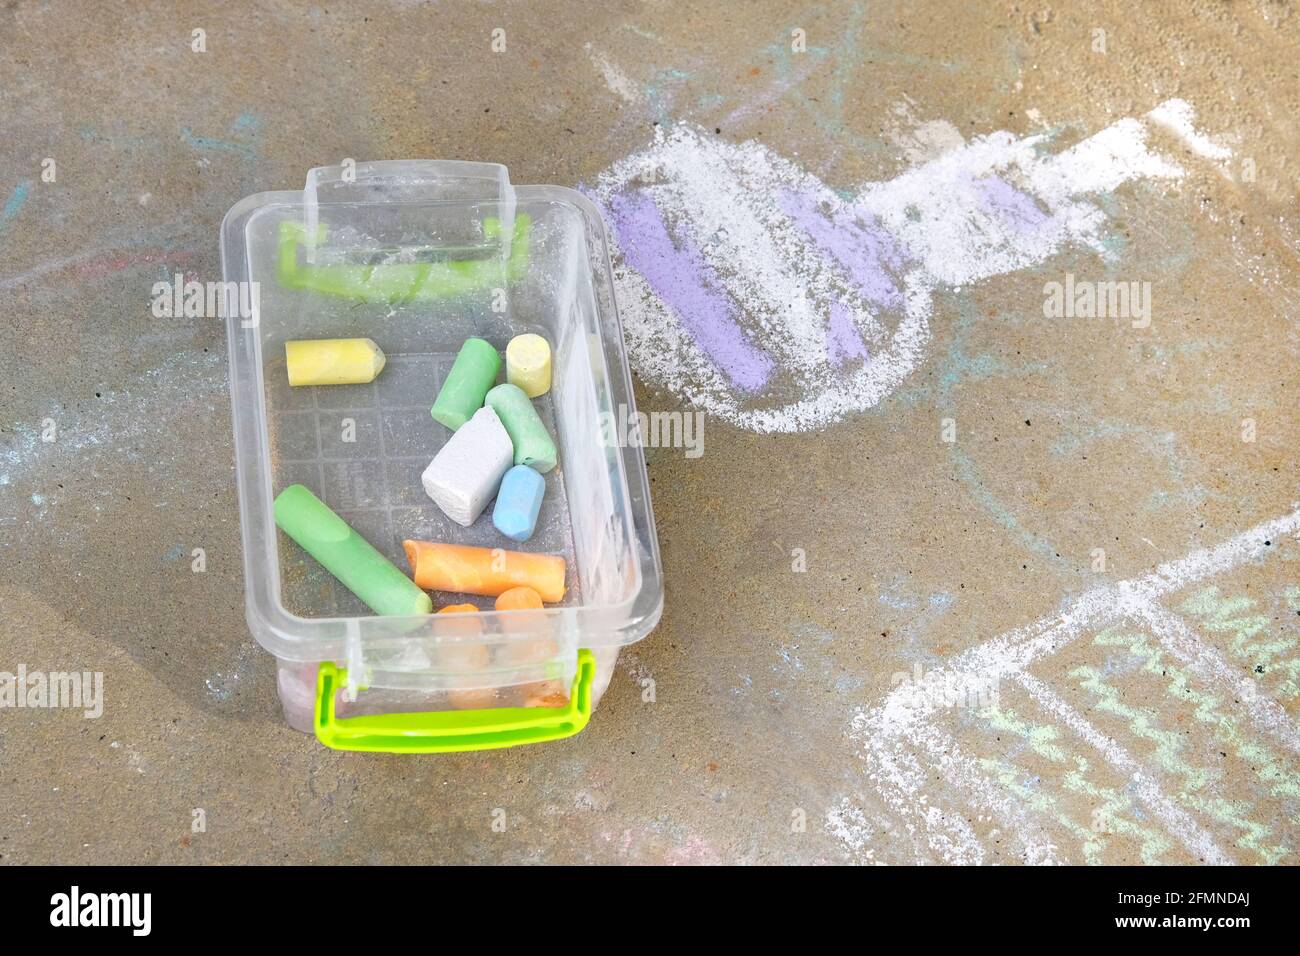 Crayons of blue, green, yellow, white in plastic box. Painted with colored crayons floor tiles in park. Childrens drawing on sidewalk. Childrens leisu Stock Photo